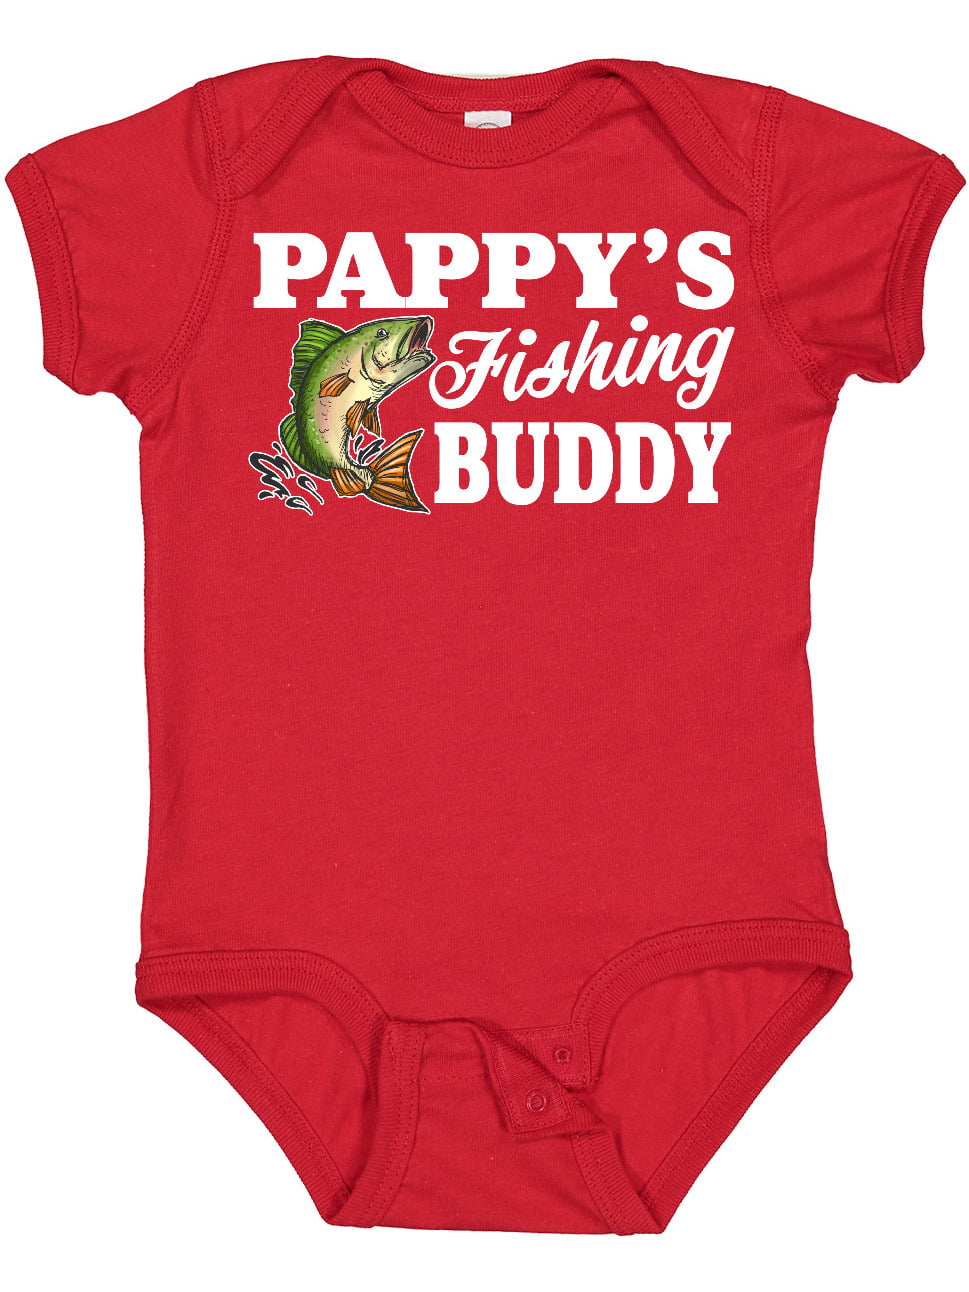 Dad's Fishing Buddy - Pack My Diapers, I'm Going Fishing with